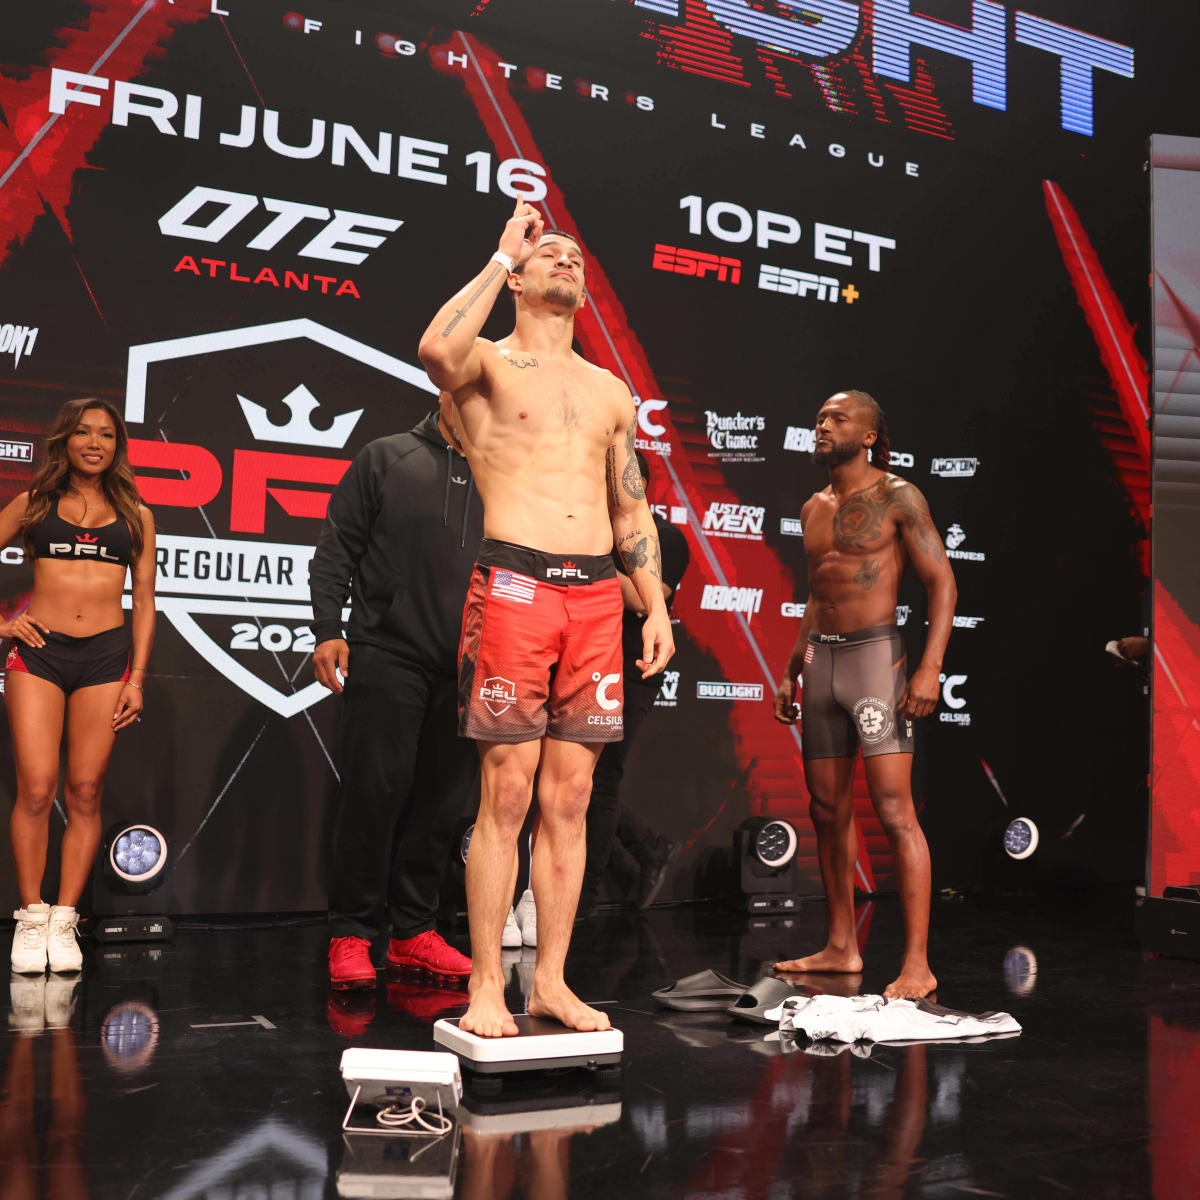 PFL 6, Welterweights and Lightweights Free Live Stream Online - How to Watch and Stream Major League and College Sports